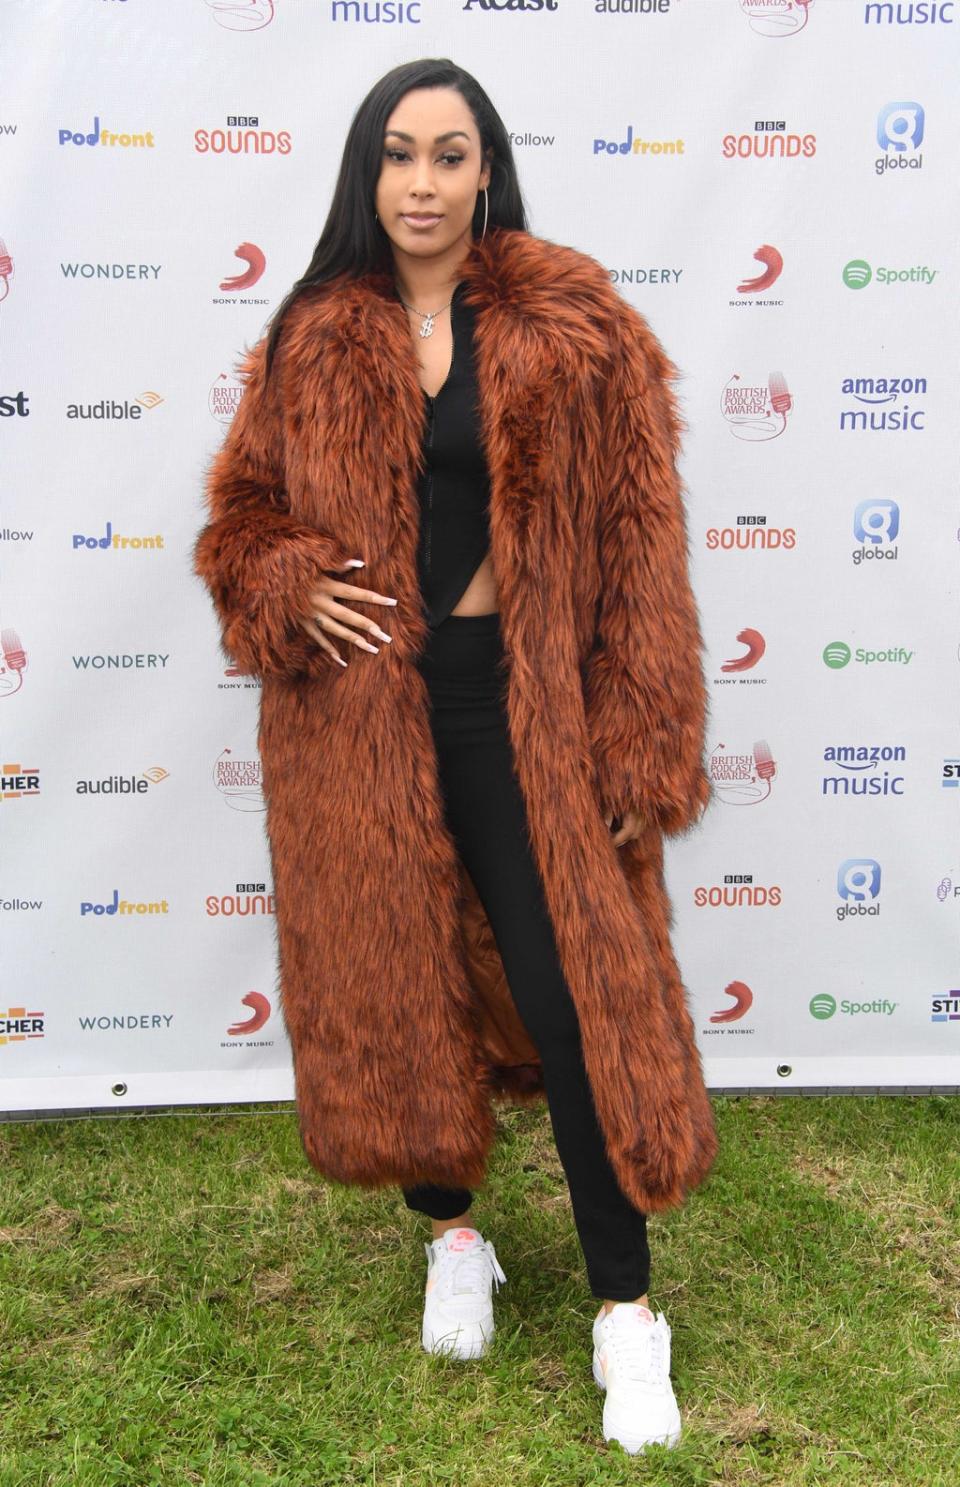 Snoochie Sly arrives at The British Podcast Awards 2021 at Brockwell Park on July 10, 2021 in London, England (Getty Images)